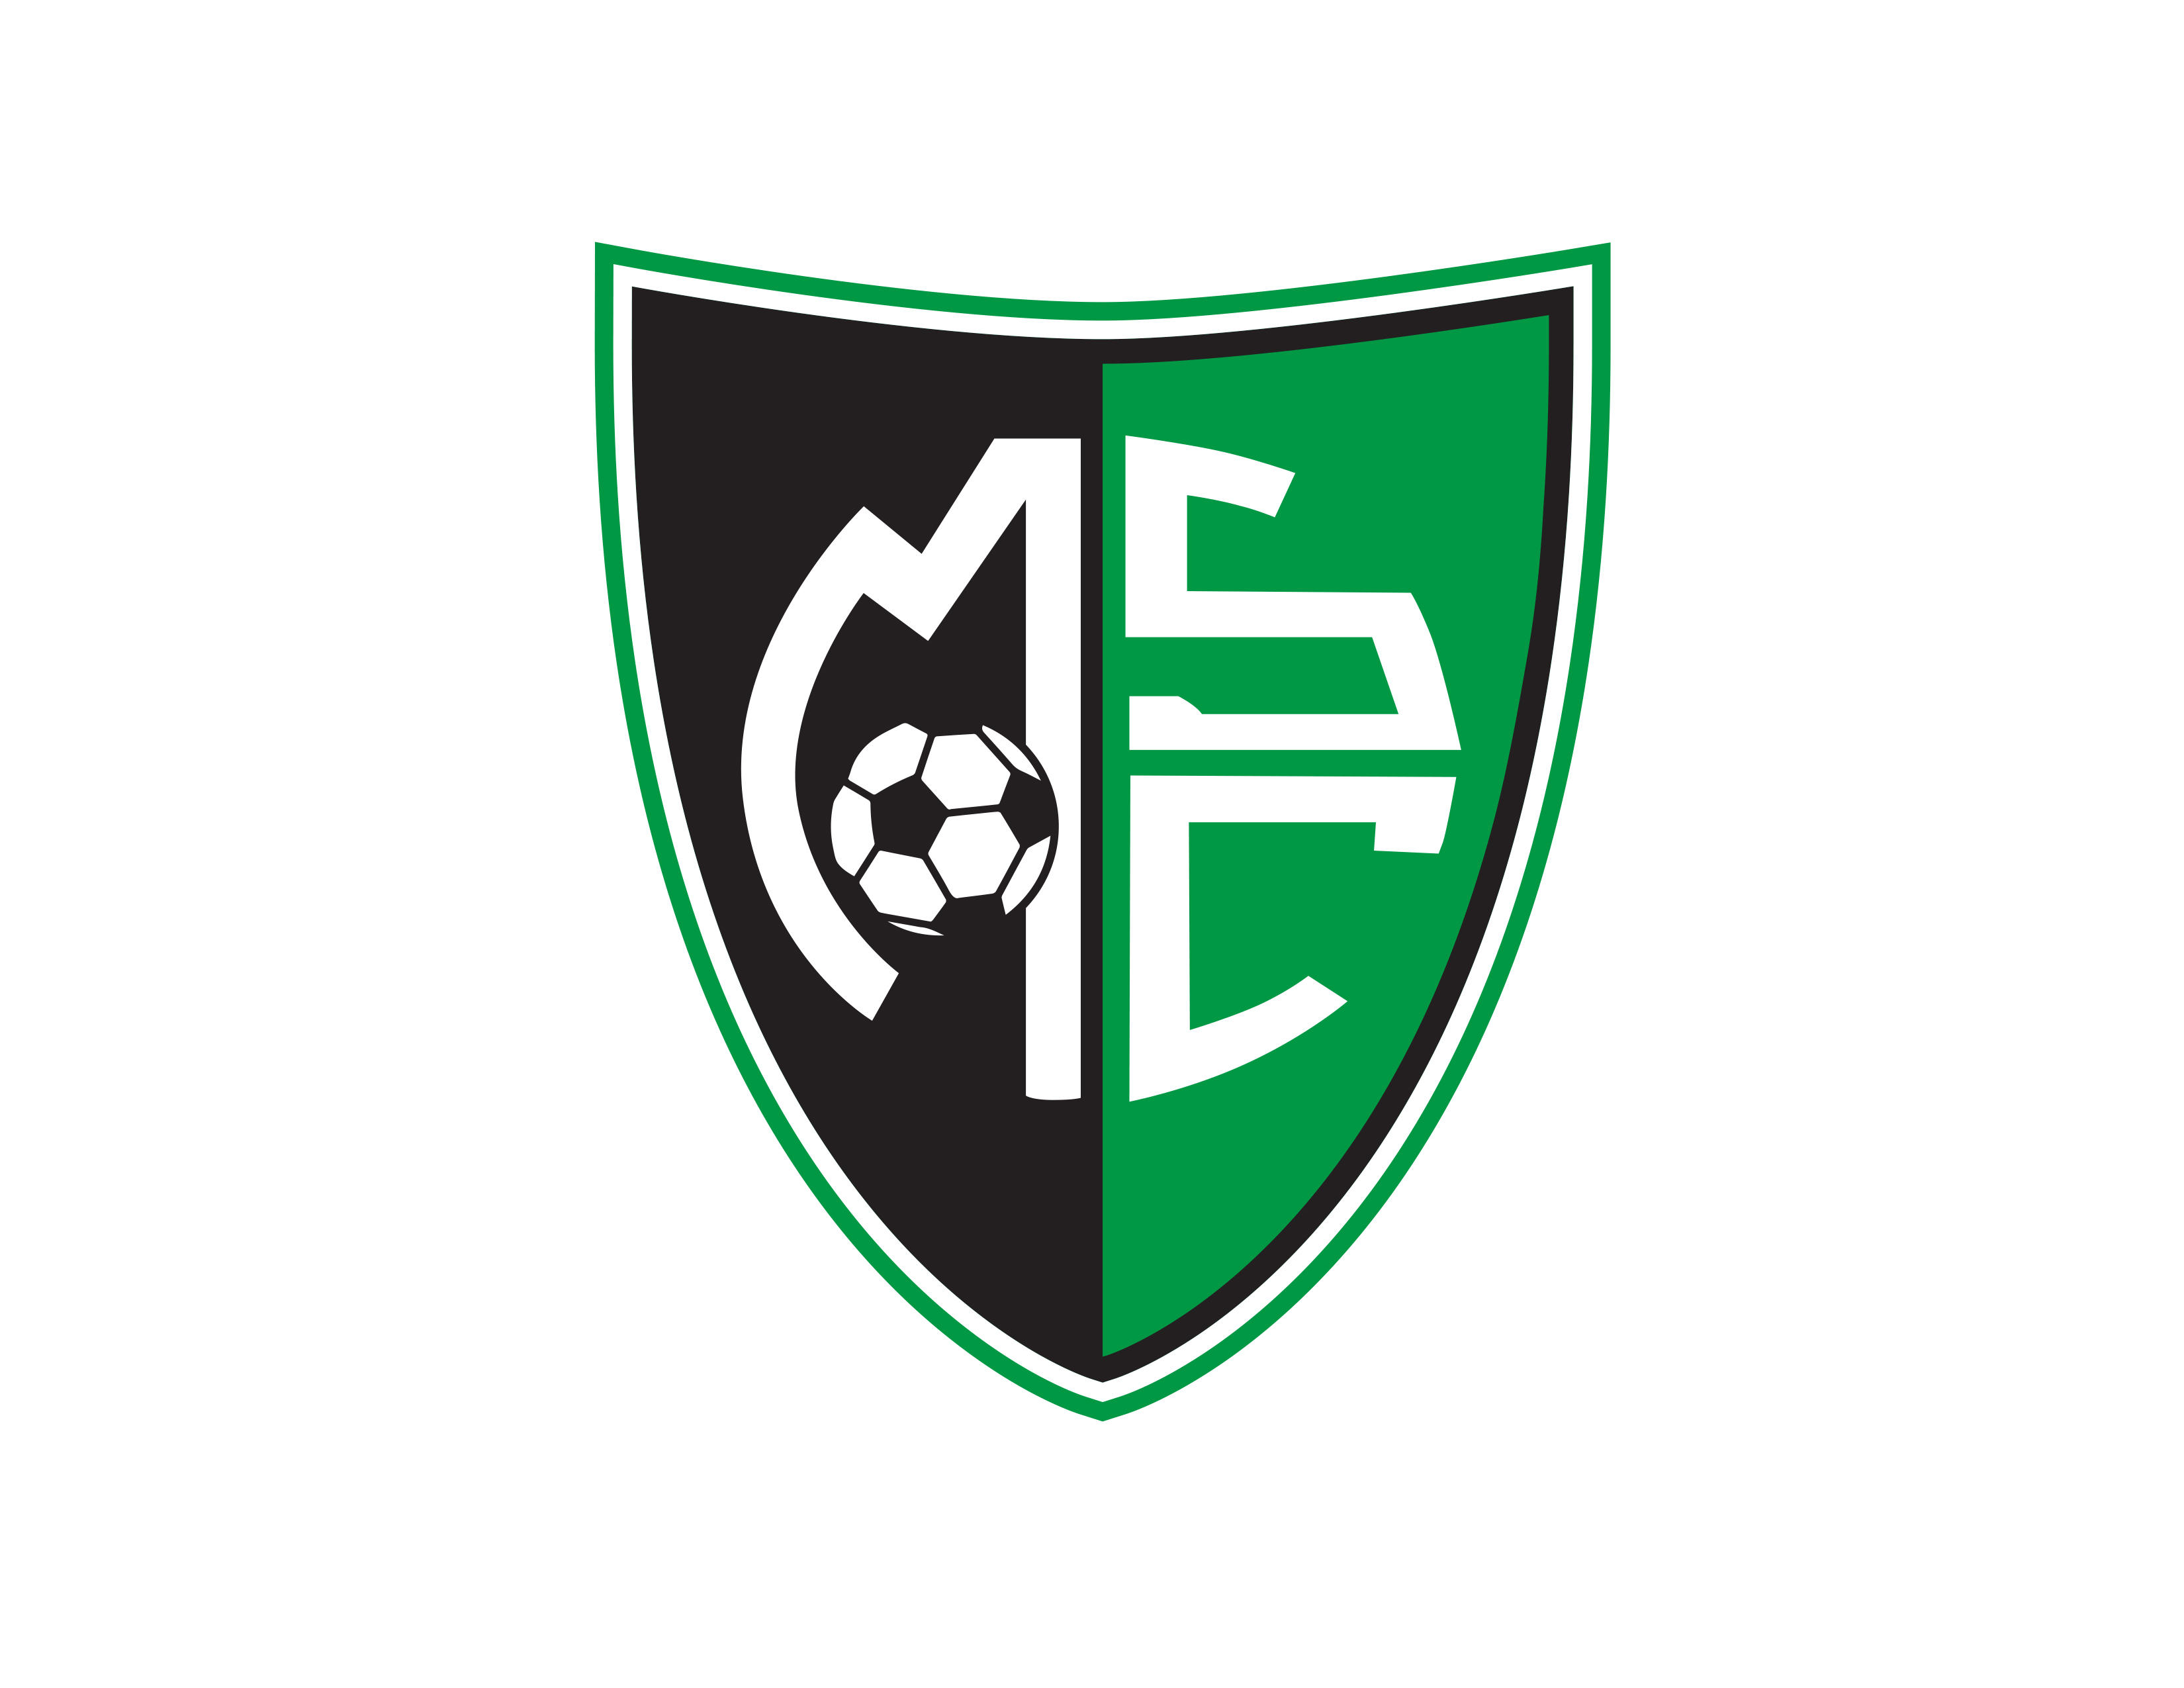 Midland Soccer Club has an immediate need for a concession manager